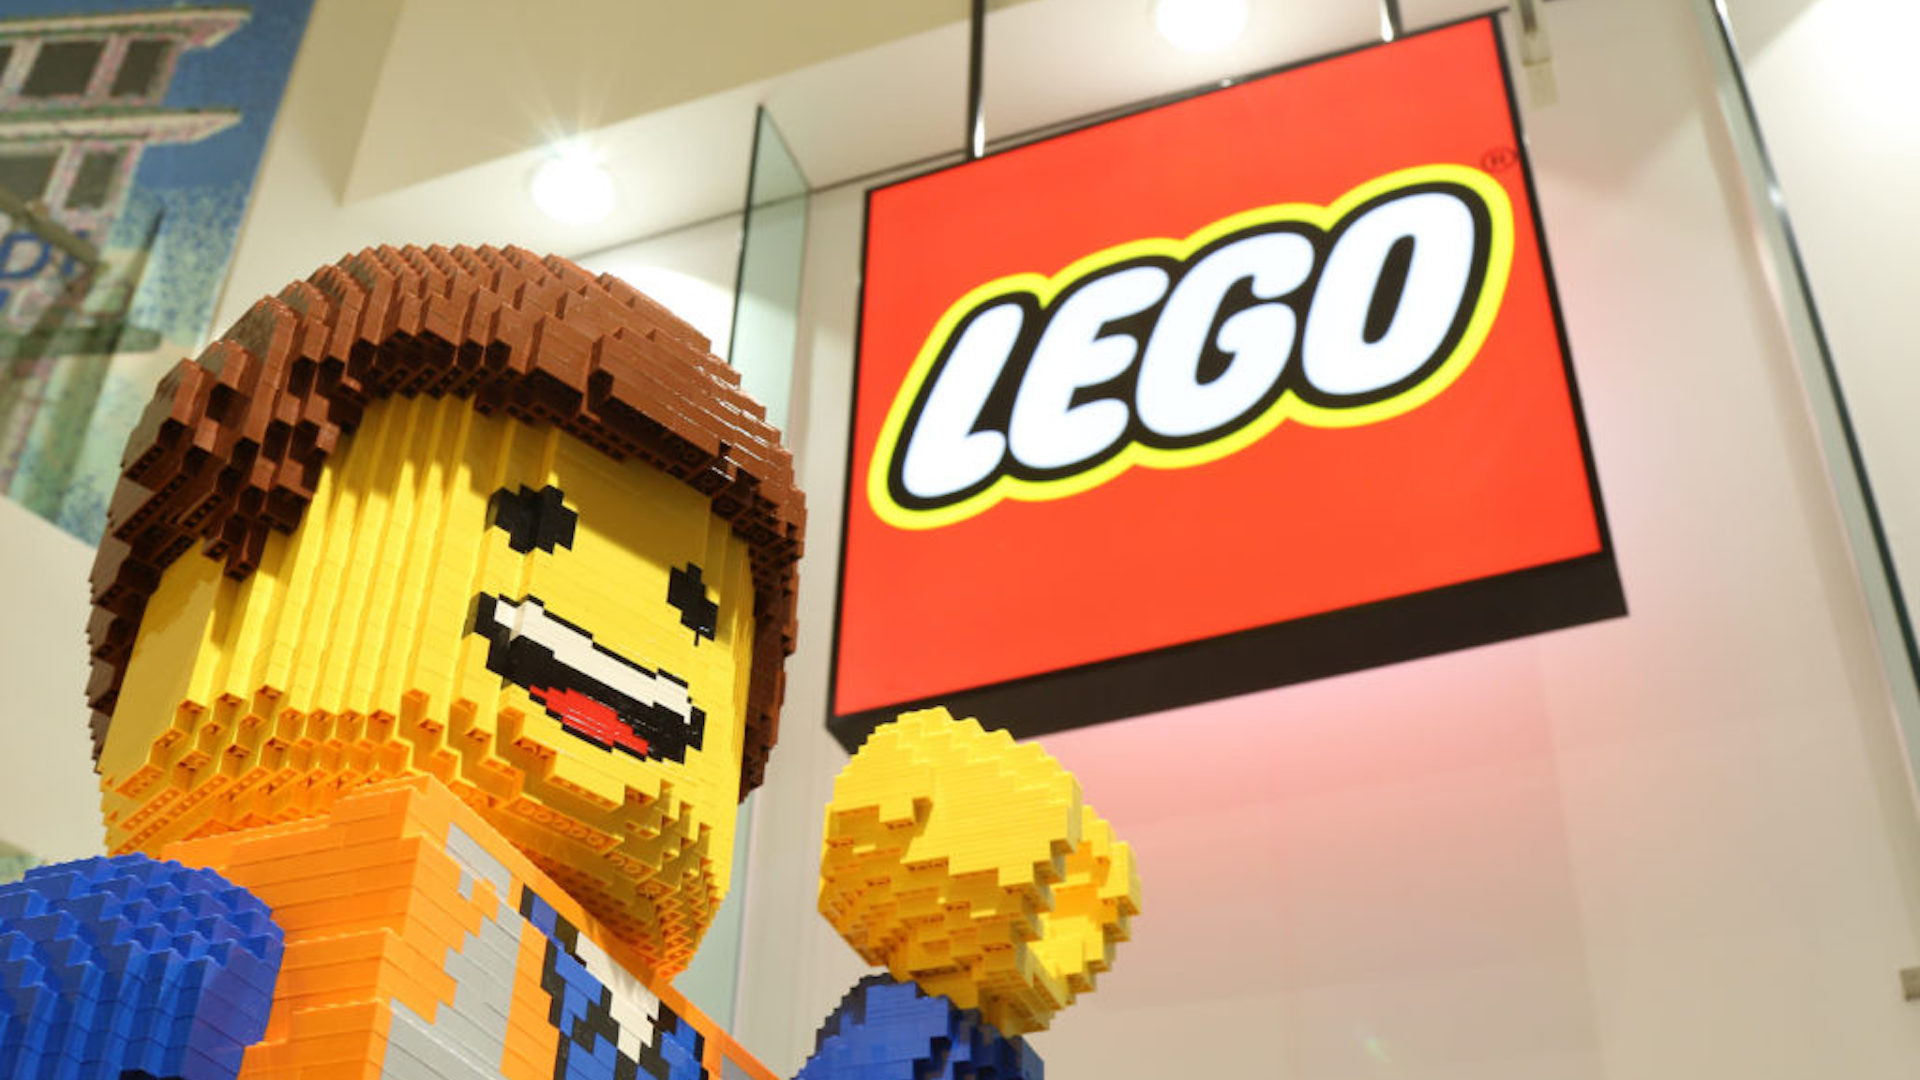 The LEGO Group: Creating an Omnichannel Network